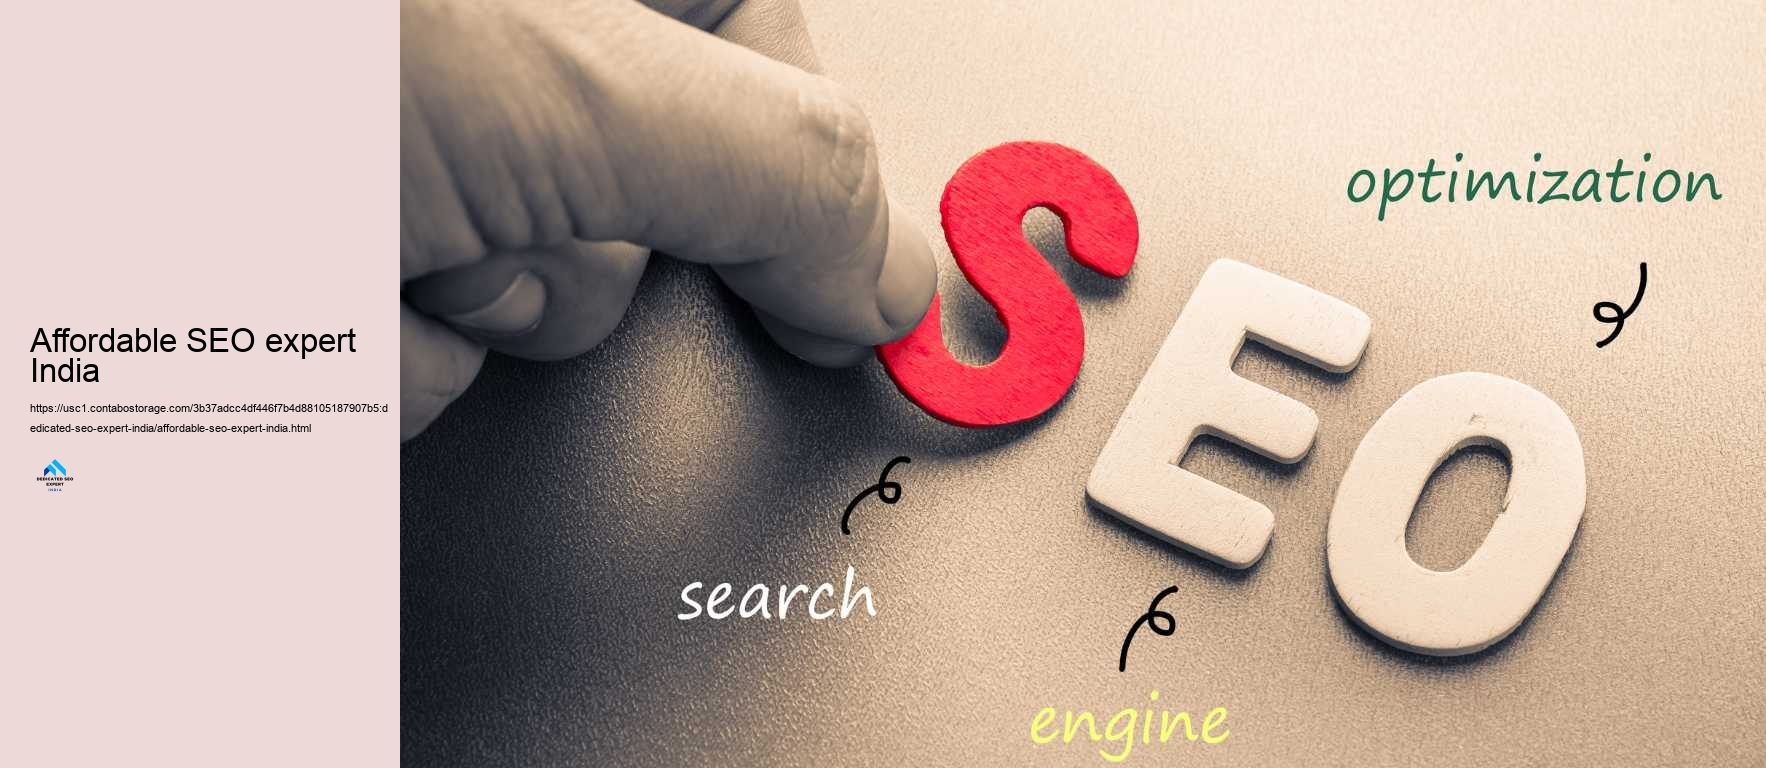 Affordable SEO expert India